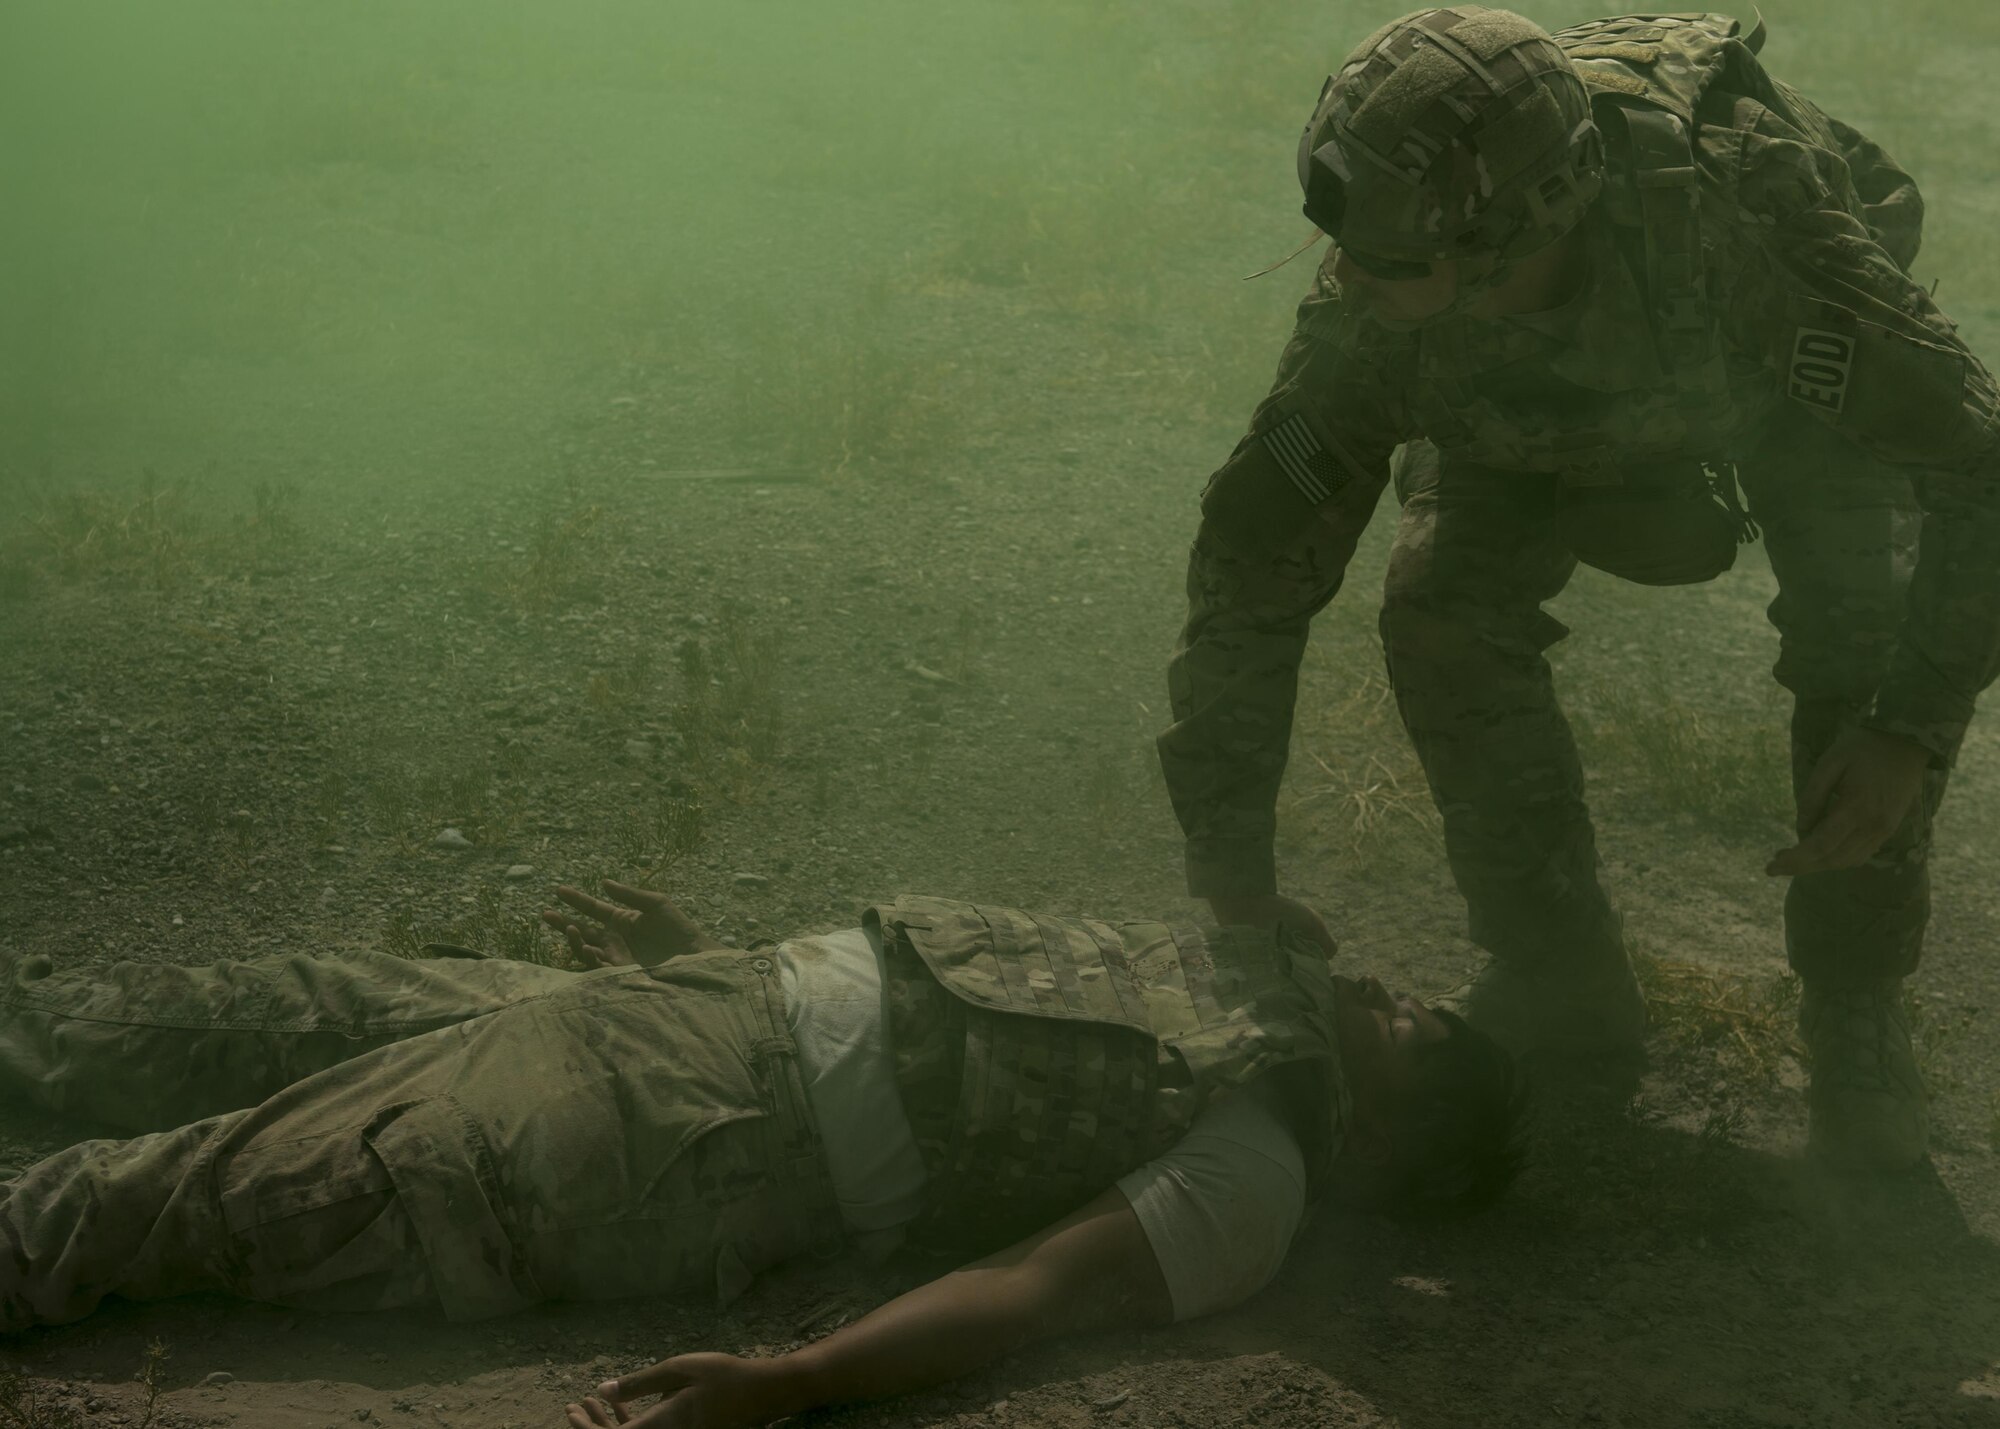 An Explosive Ordnance Disposal Airman prepares to evacuate a simulated casualty during a Tactical Combat Casualty Care exercise at Holloman Air Force Base, N.M., on April 31, 2017. The training focuses on individual trauma, tools, techniques, and treatment procedures. The exercise also included the use of moulage, non-lethal training munitions, trained role-players, and a multitude of other artificial stressors. (U.S. Air Force Photo by Senior Airman Chase Cannon)